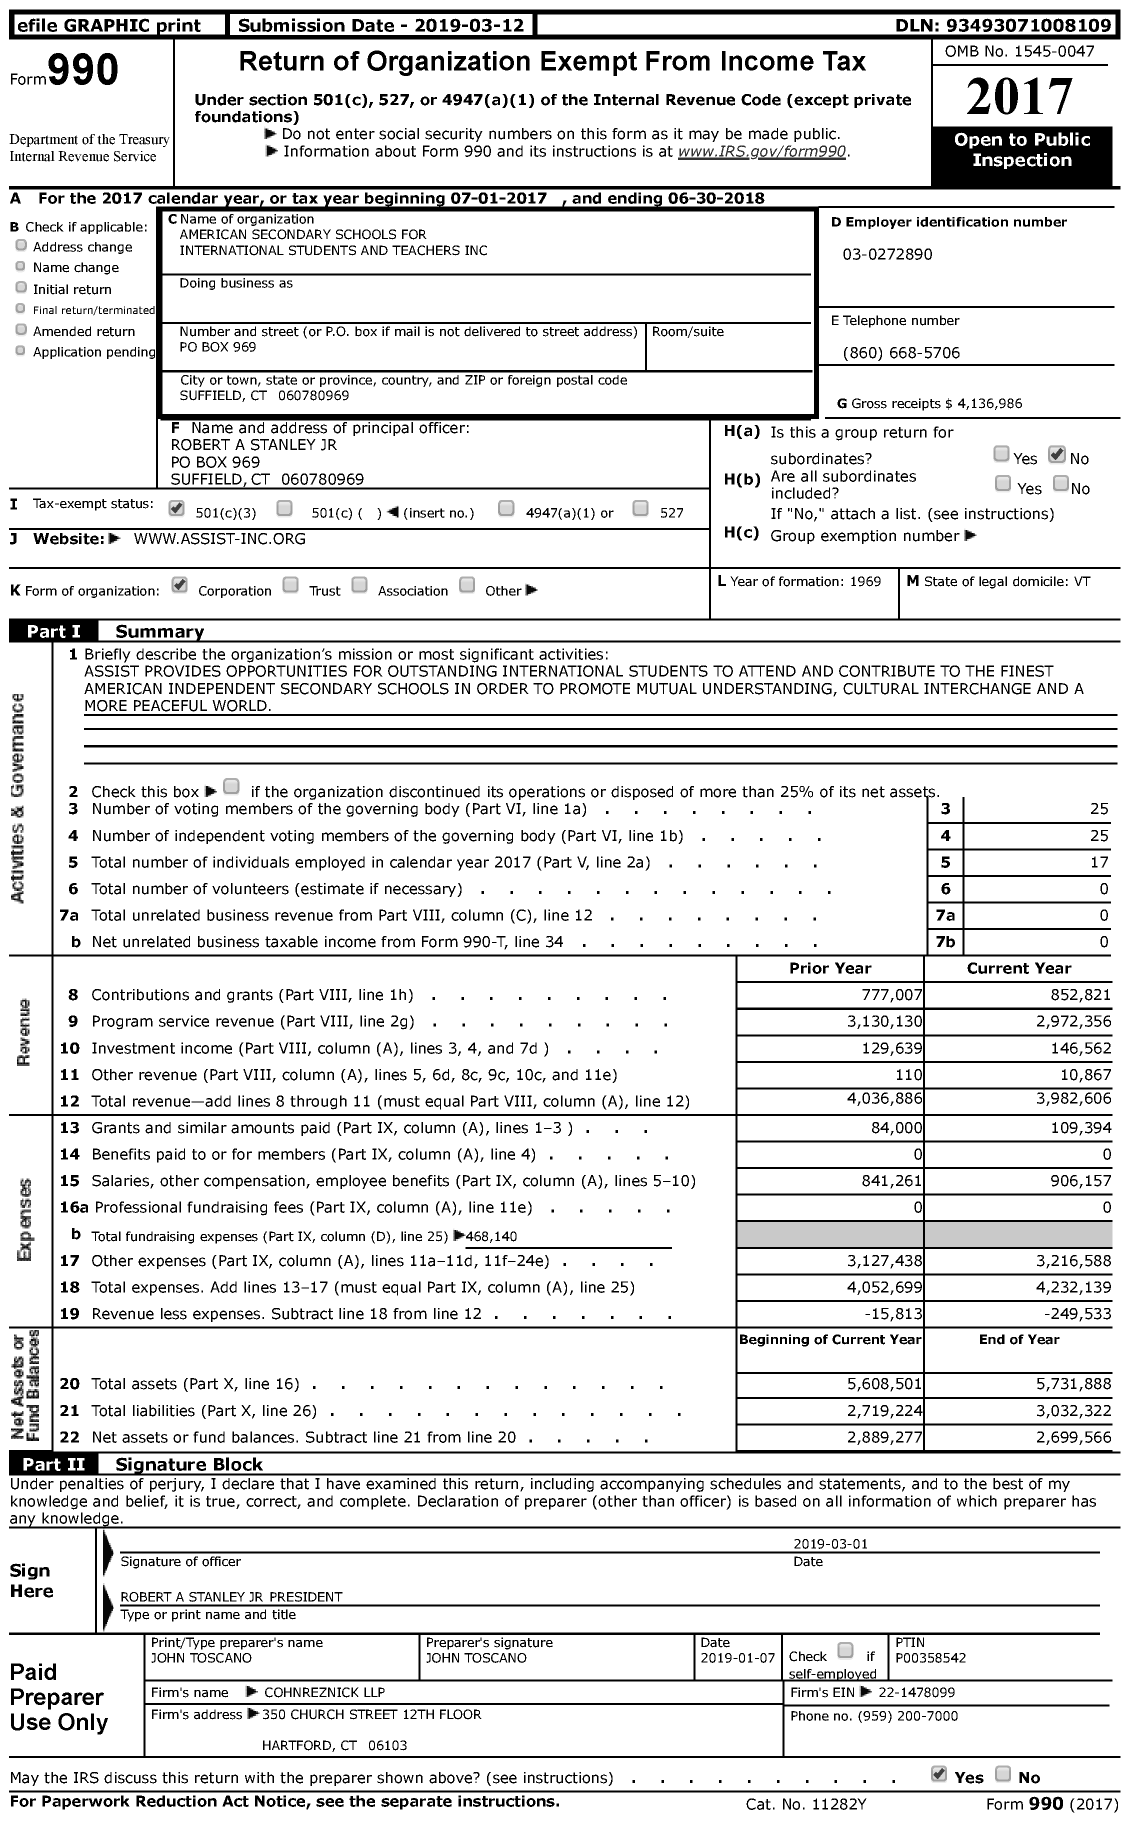 Image of first page of 2017 Form 990 for American Secondary Schools for International Students and Teachers (ASSIST)